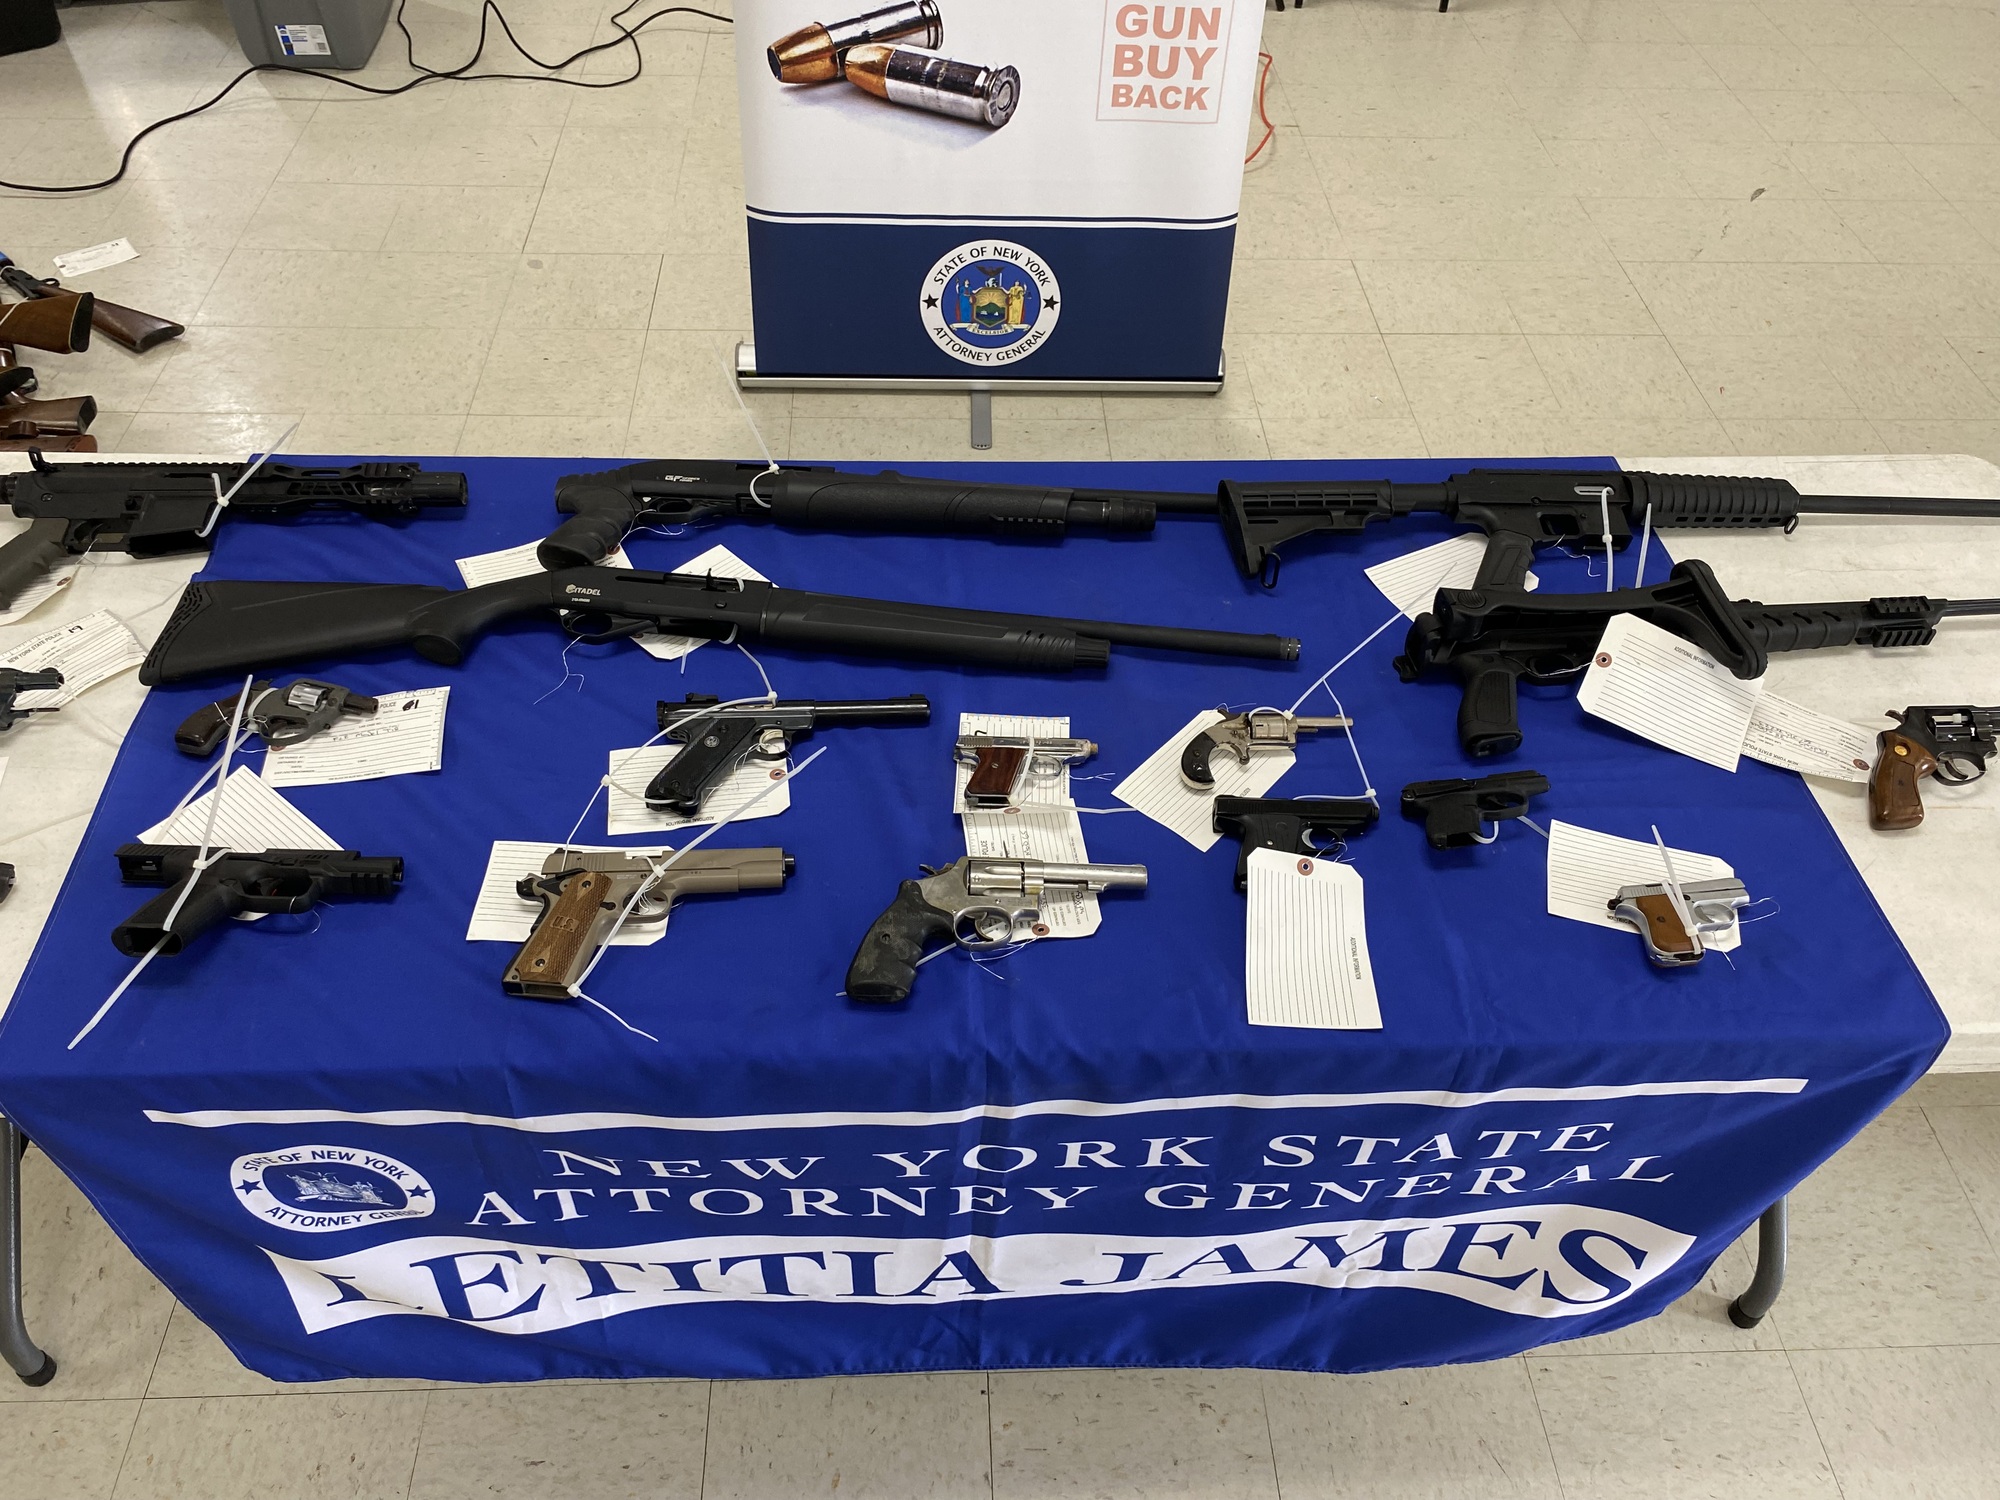 Table with a dozen firearms laying on it